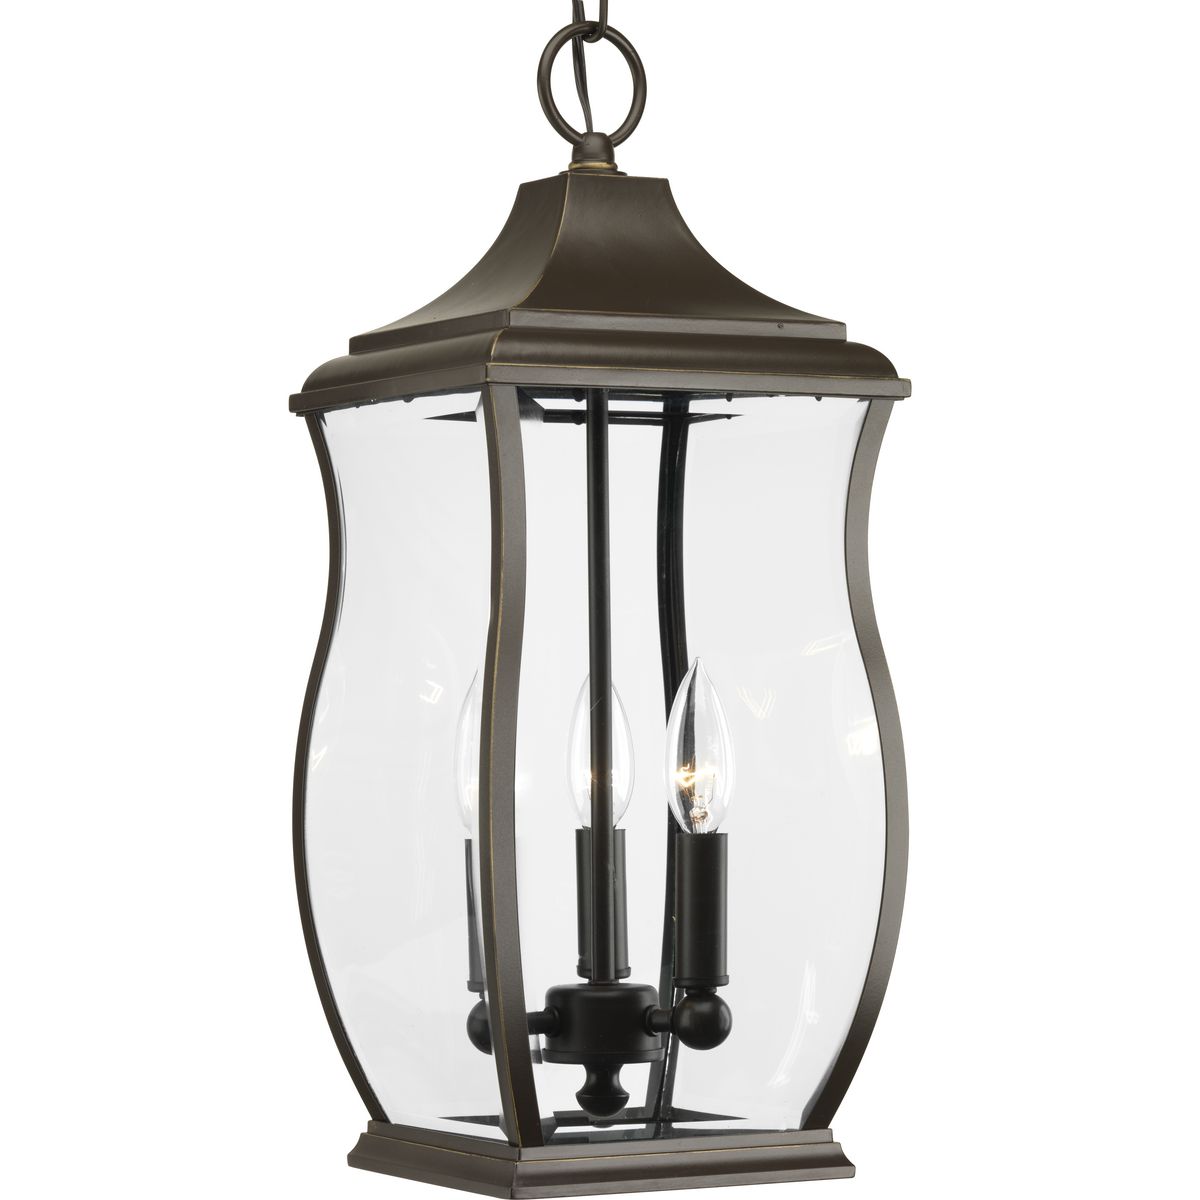 Township Outdoor Ceiling Light